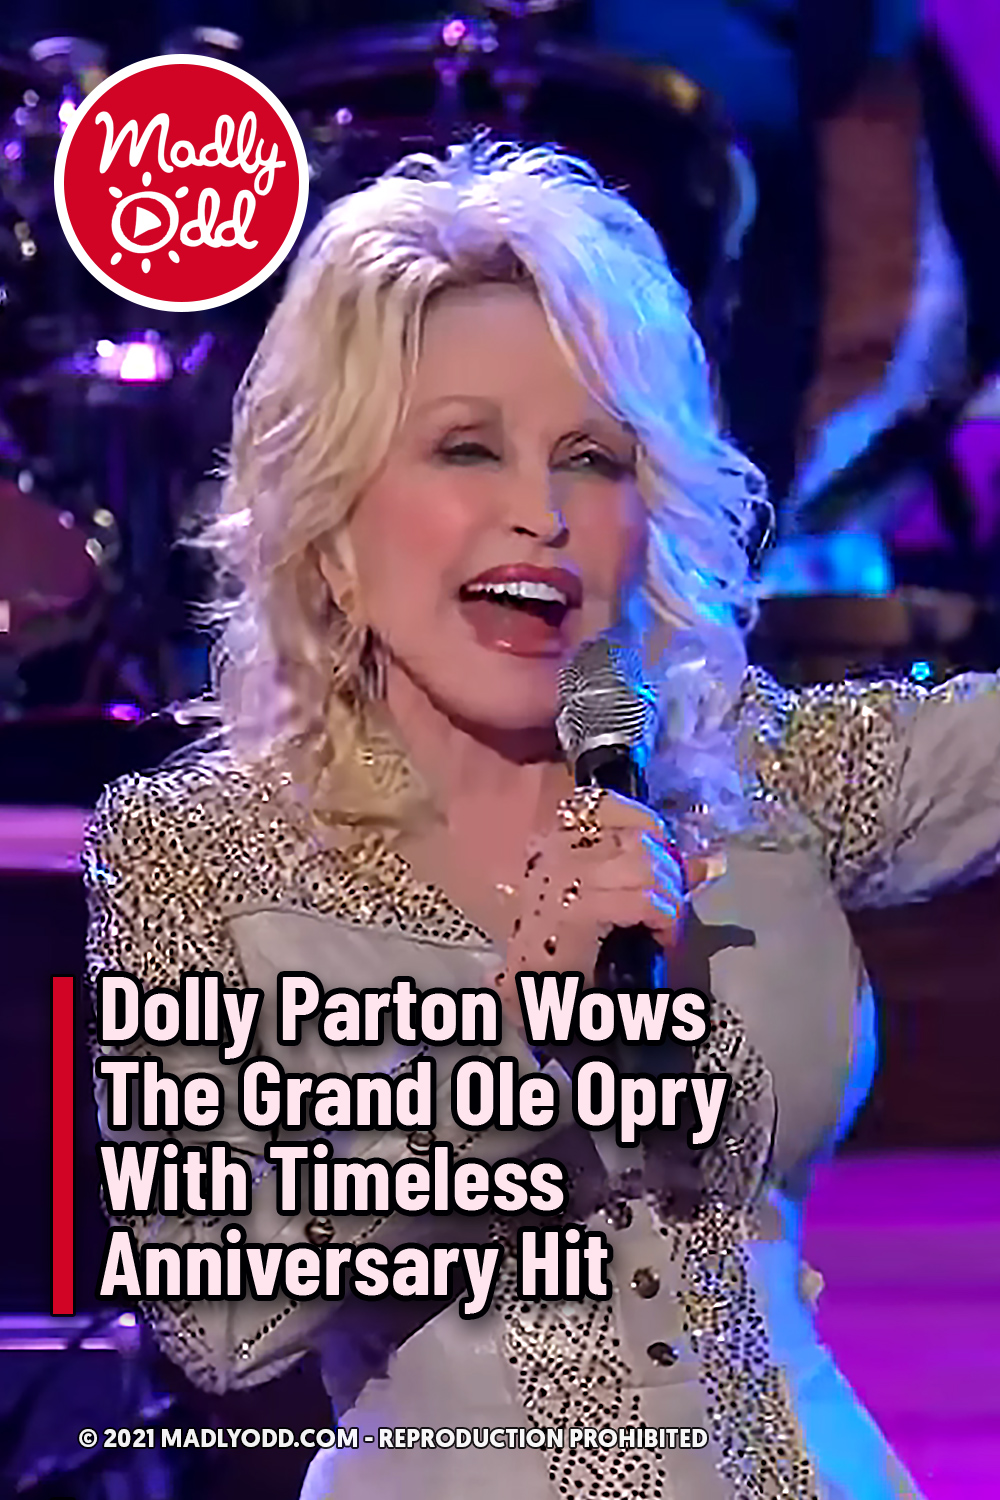 Dolly Parton Wows The Grand Ole Opry With Timeless Anniversary Hit